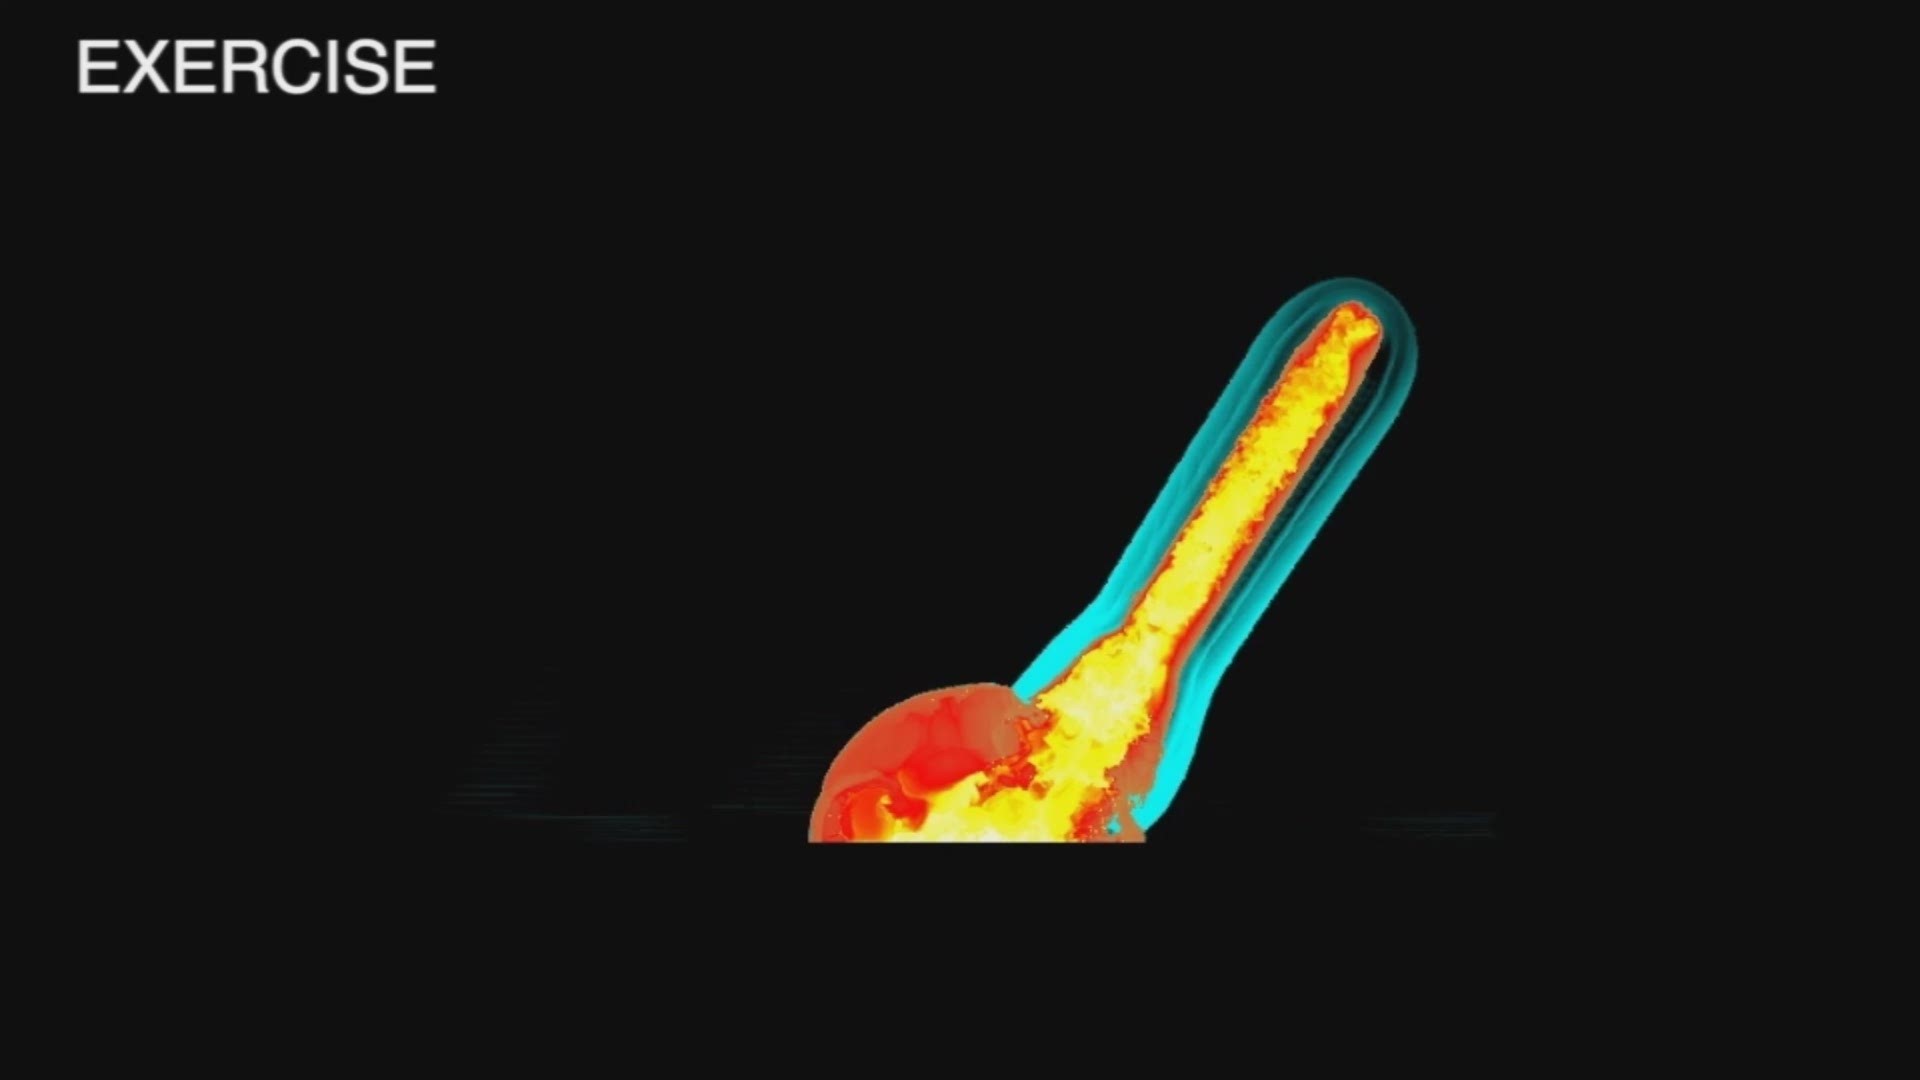 THIS IS AN EXERCISE. NOT A REAL SCENARIO. This is a simulation heat map of the impact of the asteroid 2019 PDC hitting Denver.